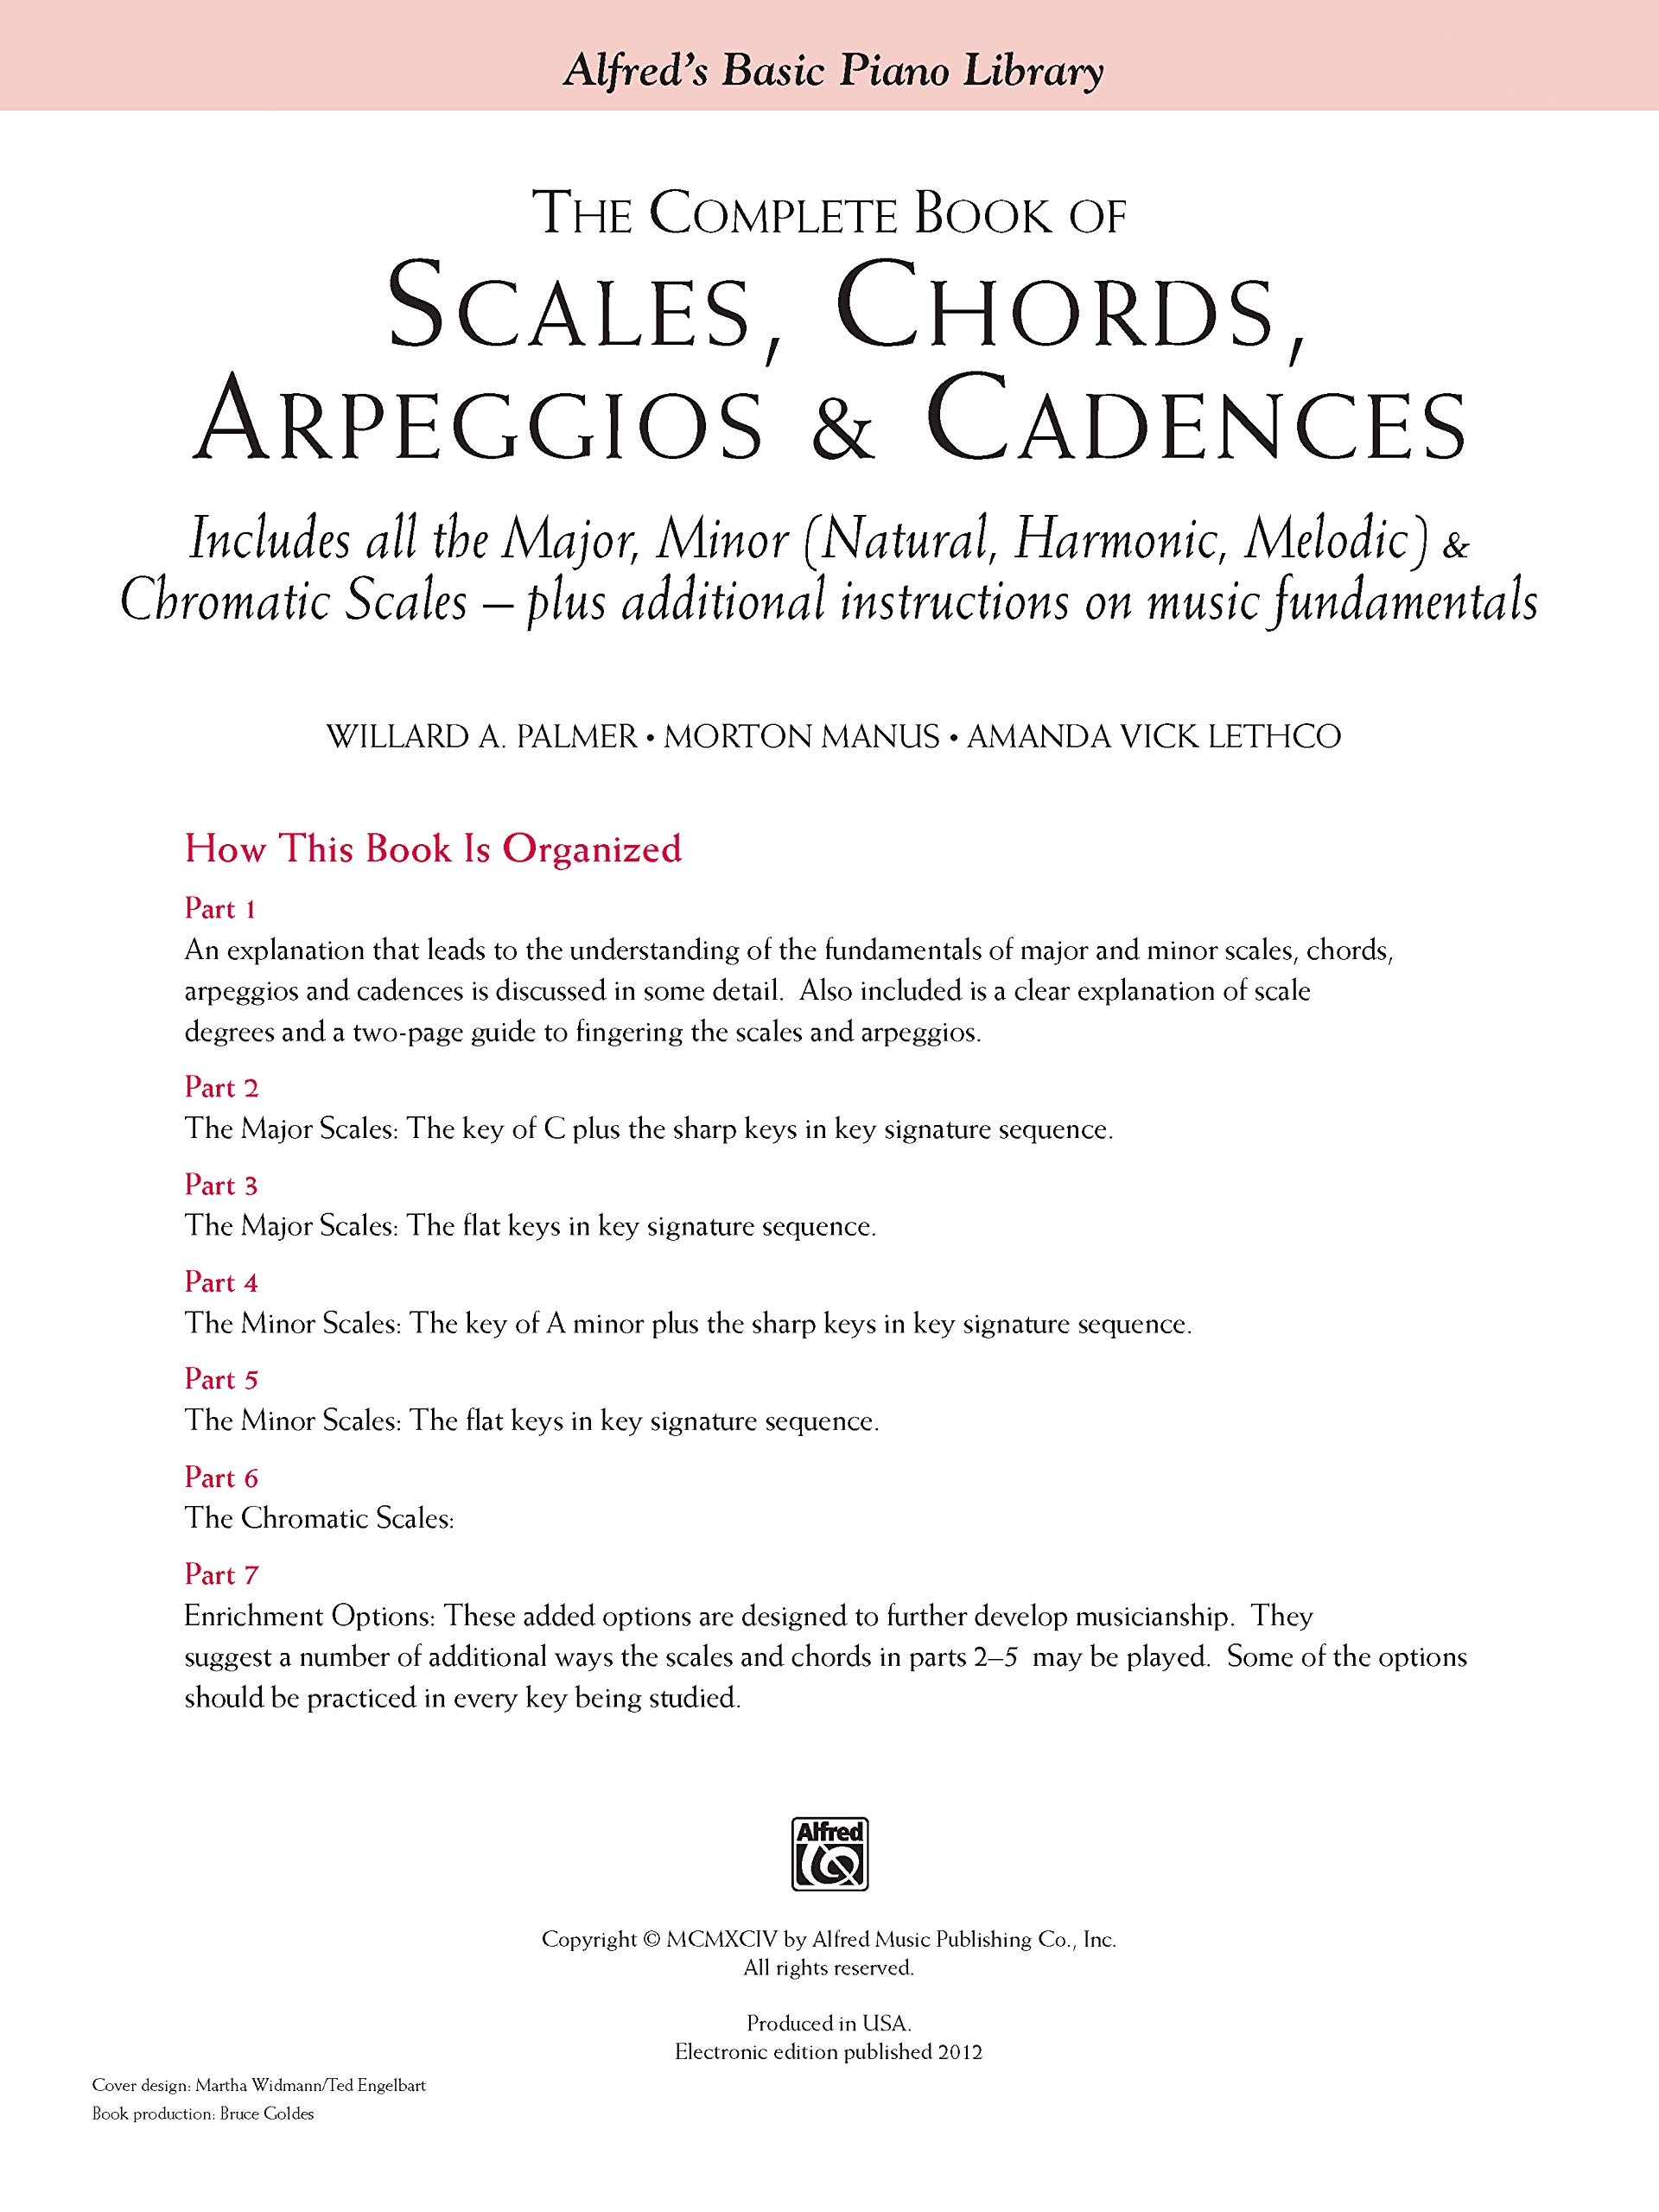 The Complete Book of Scales, Chords, Arpeggios & Cadences: Includes All the Major, Minor (Natural, Harmonic, Melodic) & Chromatic Scales -- Plus Additional Instructions on Music Fundamentals